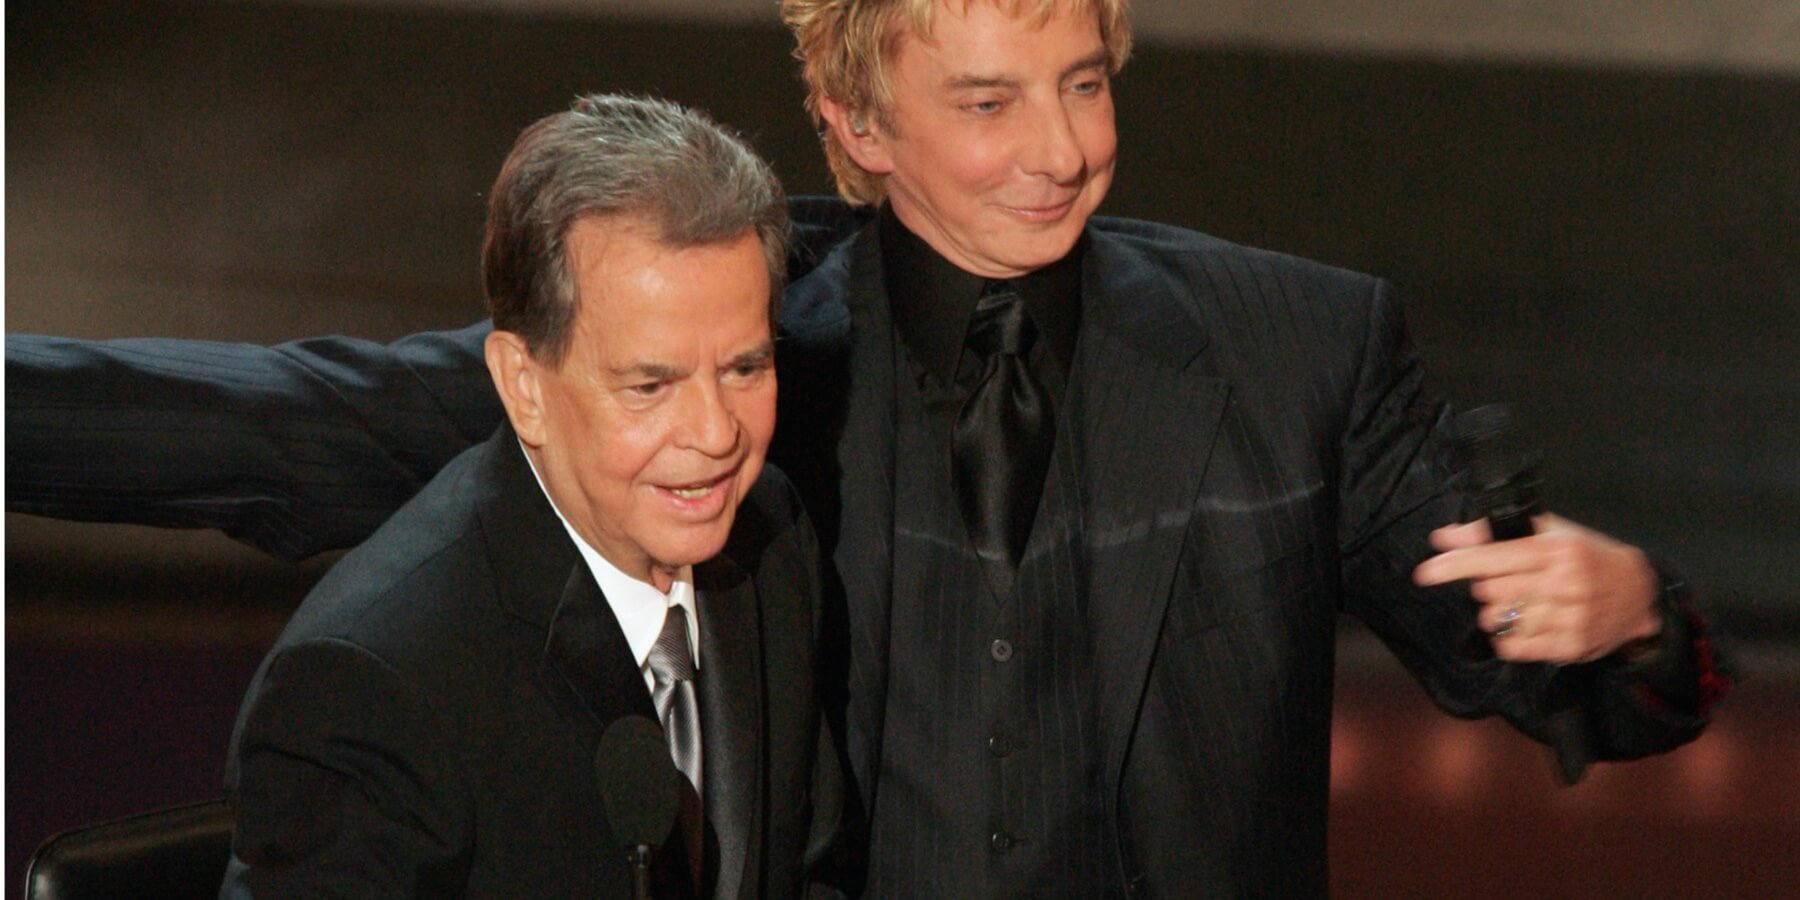 Dick Clark and Barry Manilow pose during The 58th Annual Primetime Emmy Awards at the Shrine Auditorium.